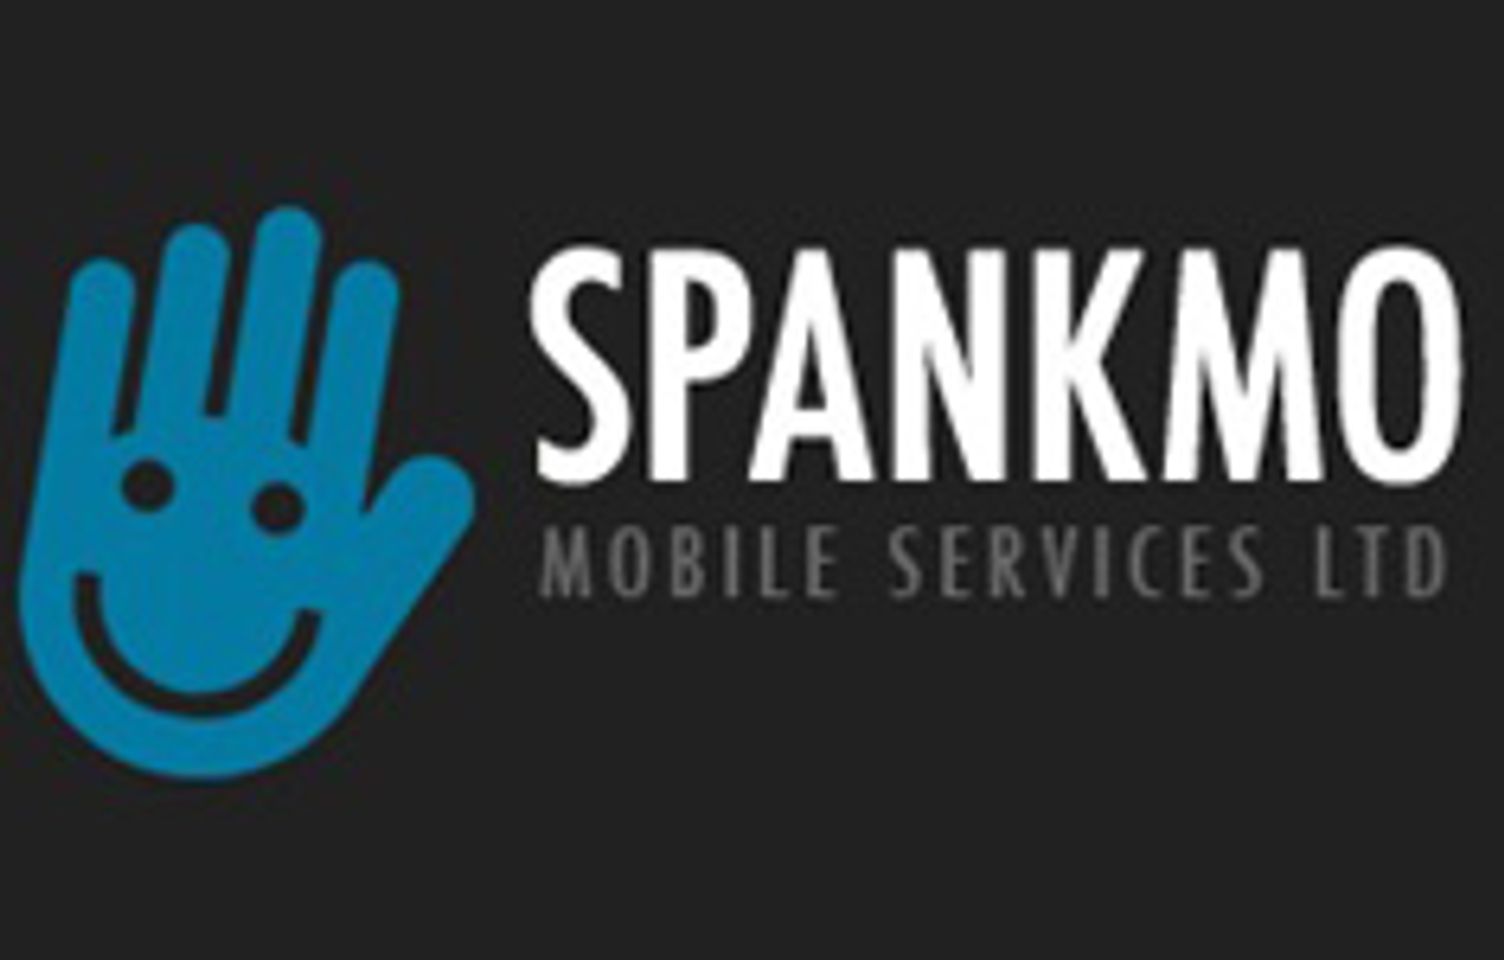 Spankmo Signs Lucas to Mobile Development Deal